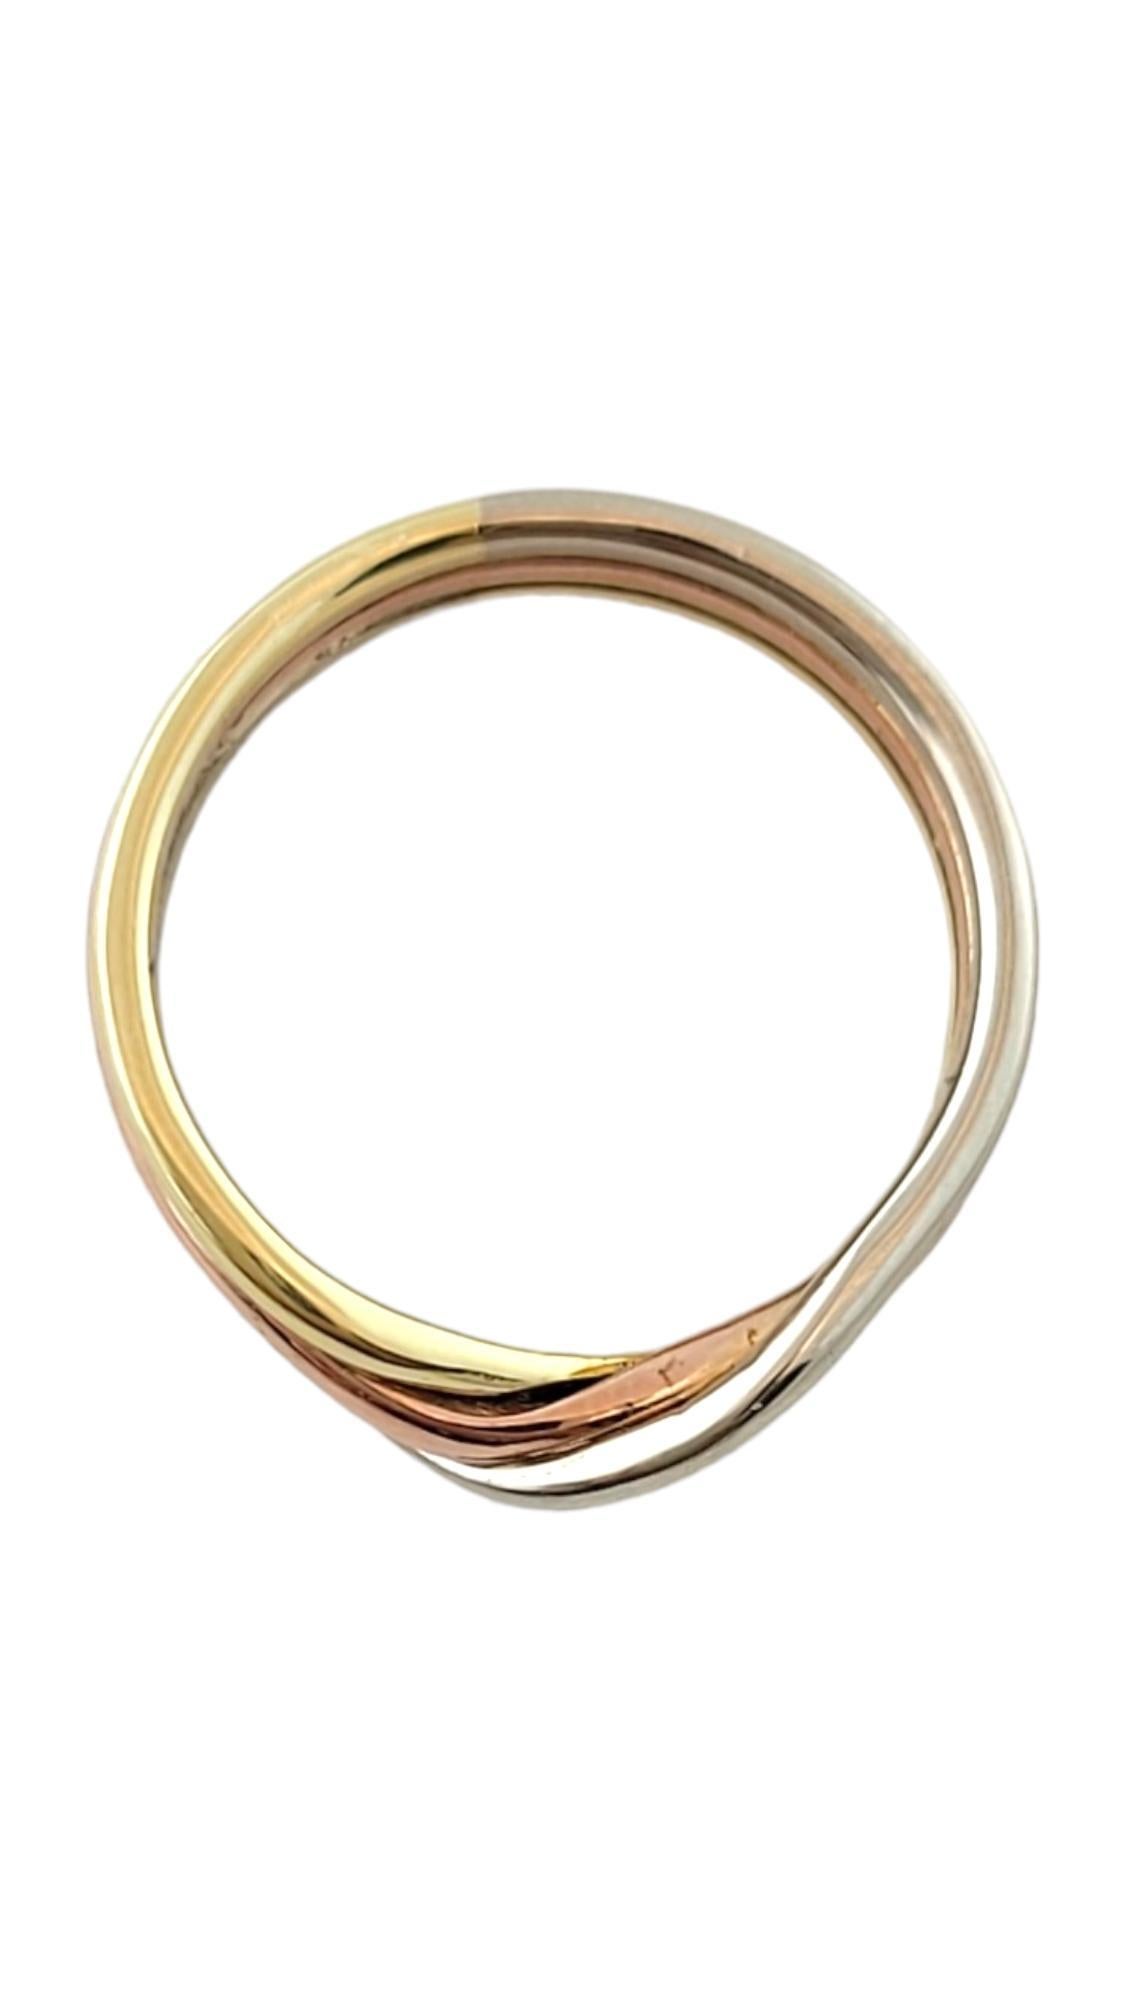 Women's 14K Tri Colored Three Band Ring Size 5.25-5.5 #17335 For Sale